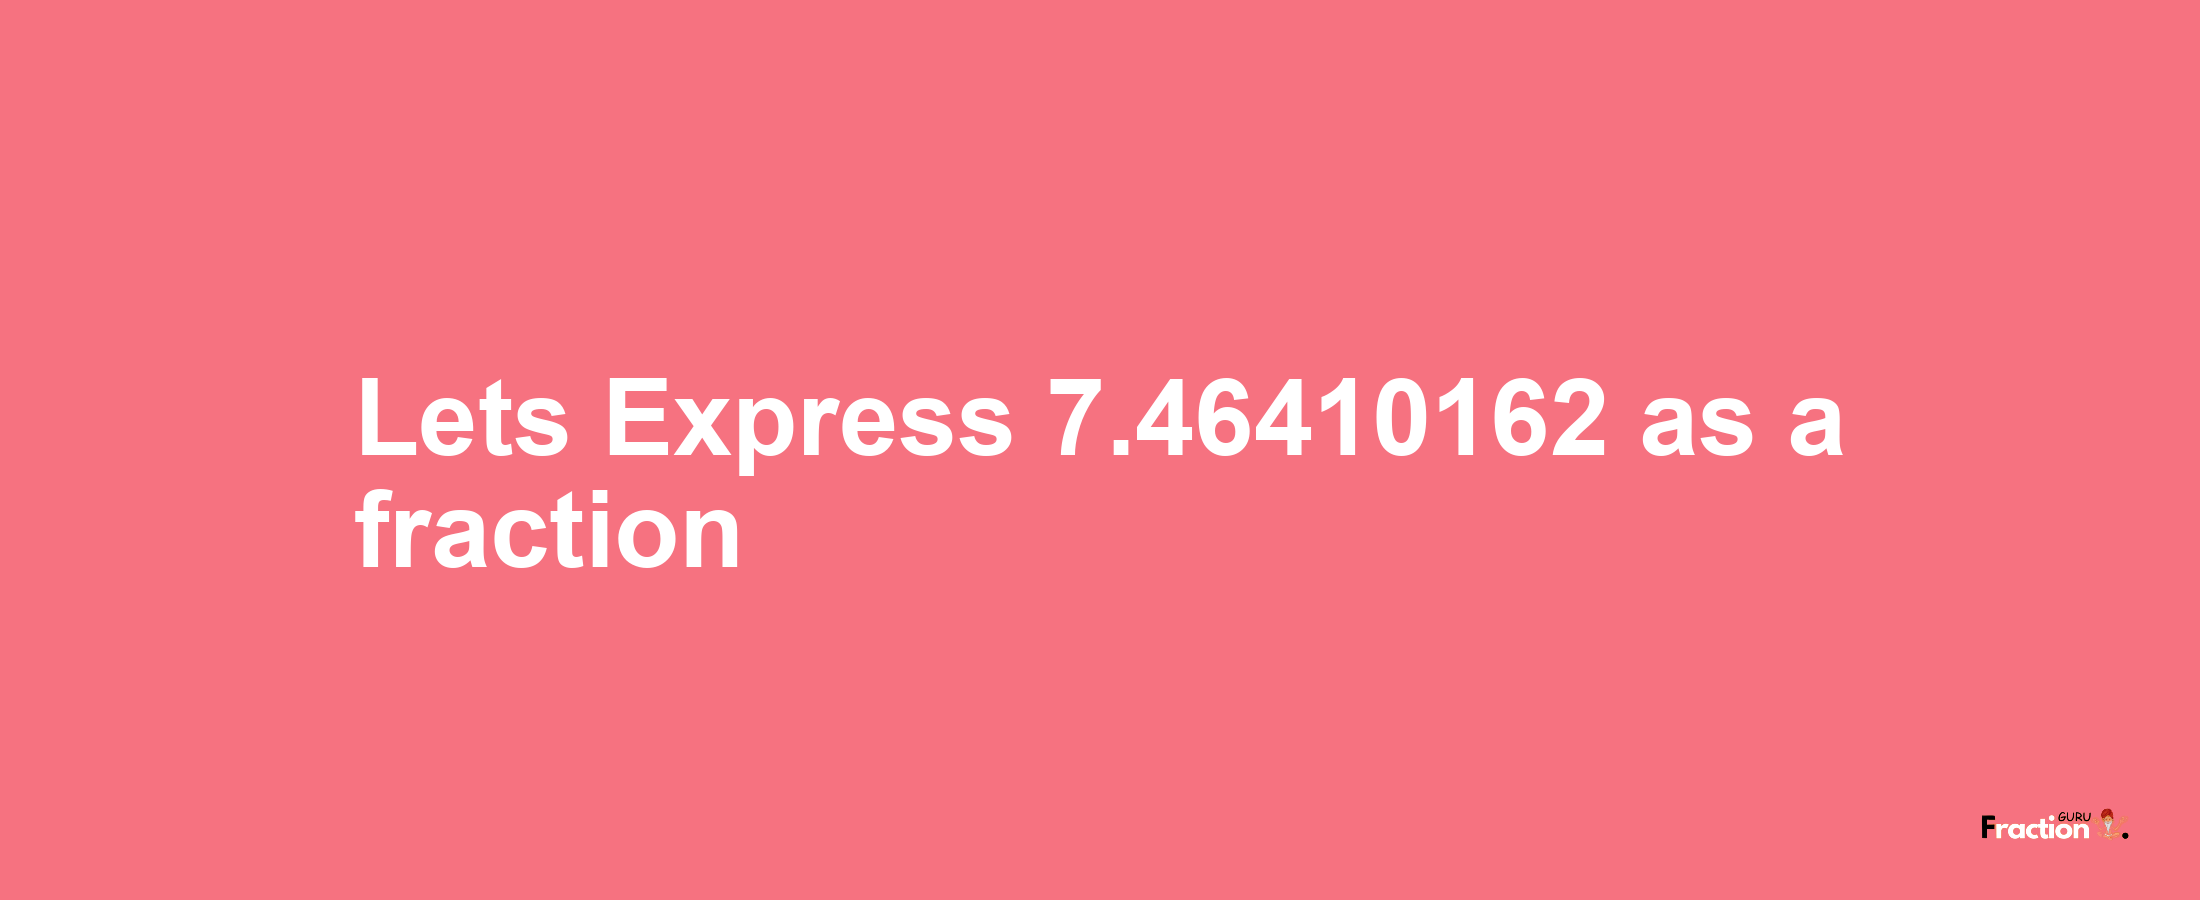 Lets Express 7.46410162 as afraction